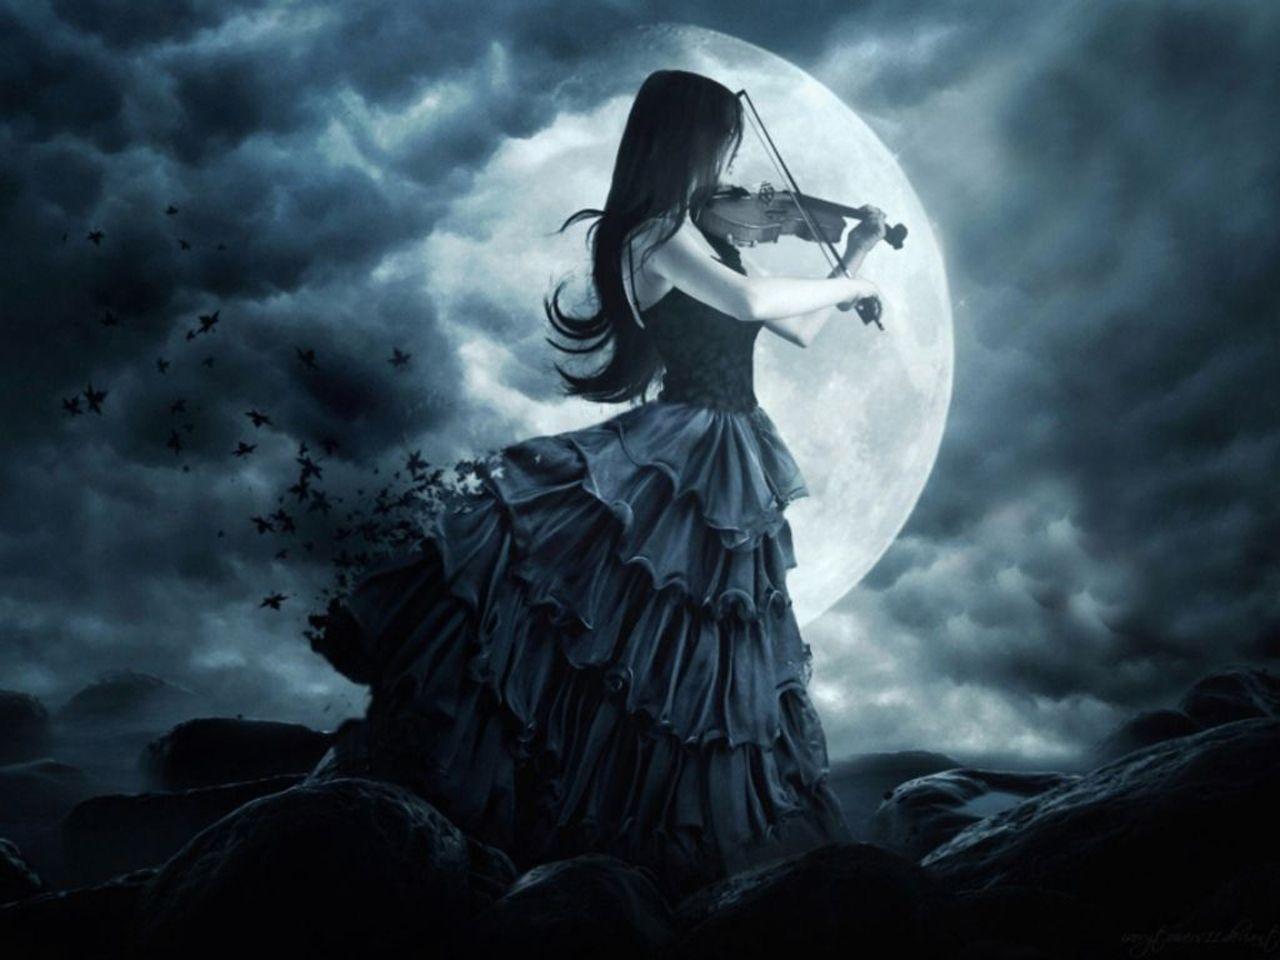 Girl And Moon Wallpapers Wallpaper Cave